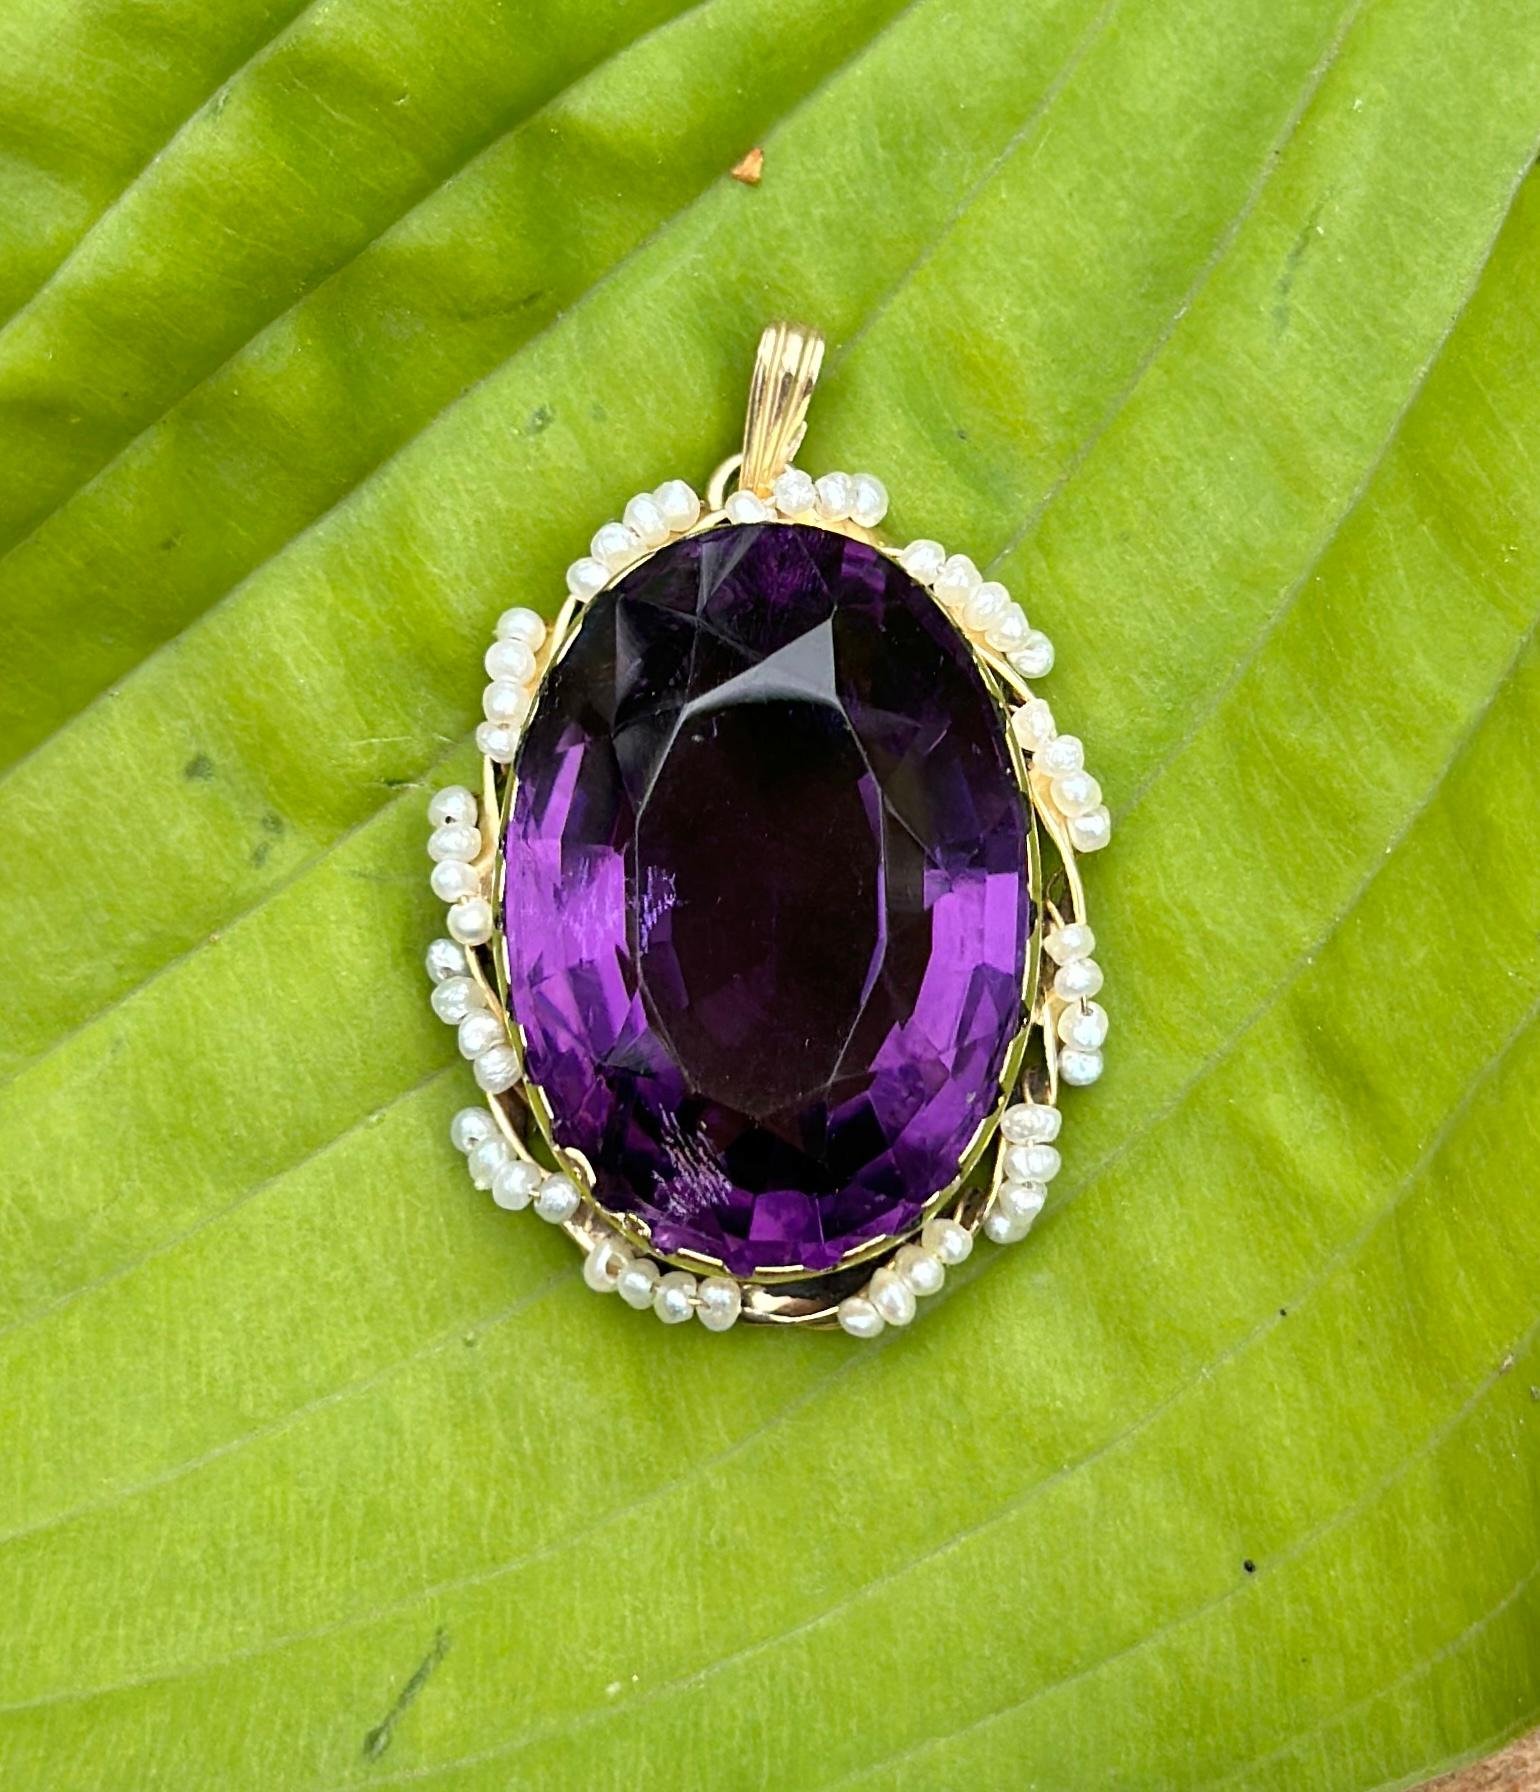 THIS IS A STUNNING 37 CARAT OVAL FACETED AMETHYST AND PEARL LAVALIERE PENDANT WITH THE MOST GORGEOUS MONUMENTAL NATURAL OVAL FACETED AMETHYST GEM SET IN A CUT DOWN COLLET ADORNED WITH SEED PEARLS IN 14 KARAT YELLOW GOLD.  THIS IS A DRAMATIC ROMANTIC